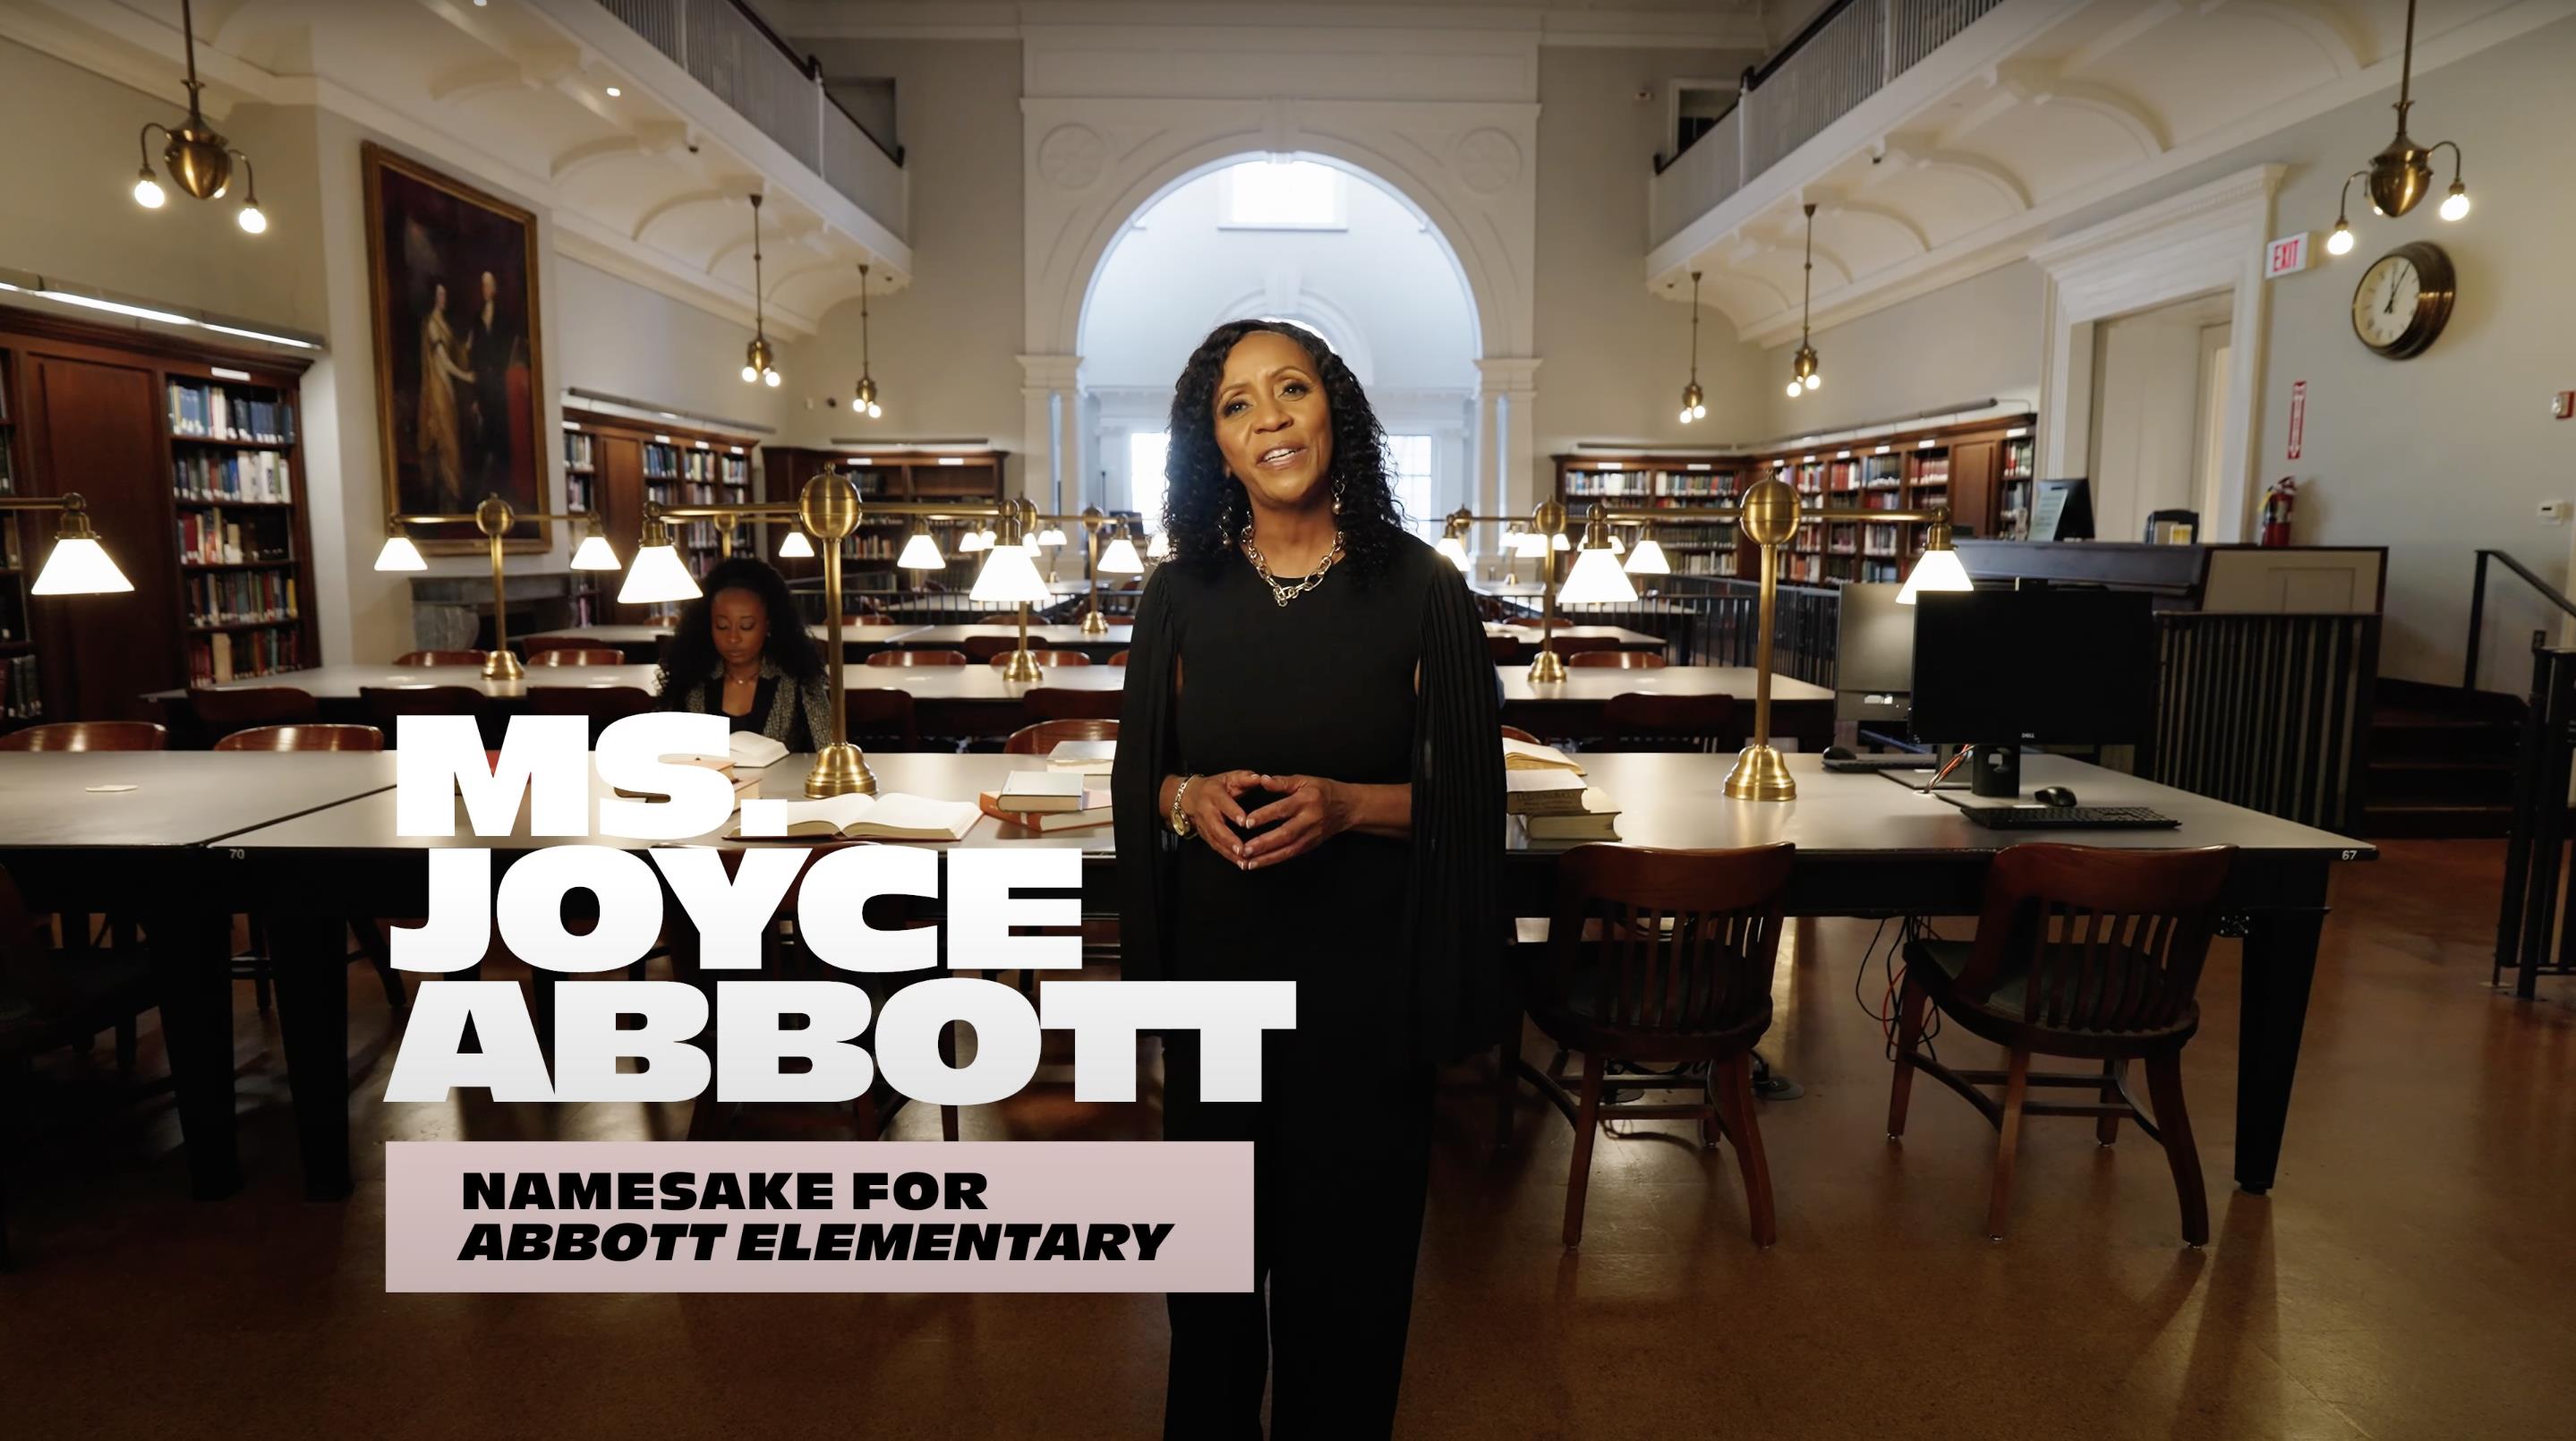 A&G client Visit Philadelphia launches "Little Free(dom) Library" with Ms. Joyce Abbott, namesake of Abbott Elementary, in new campaign